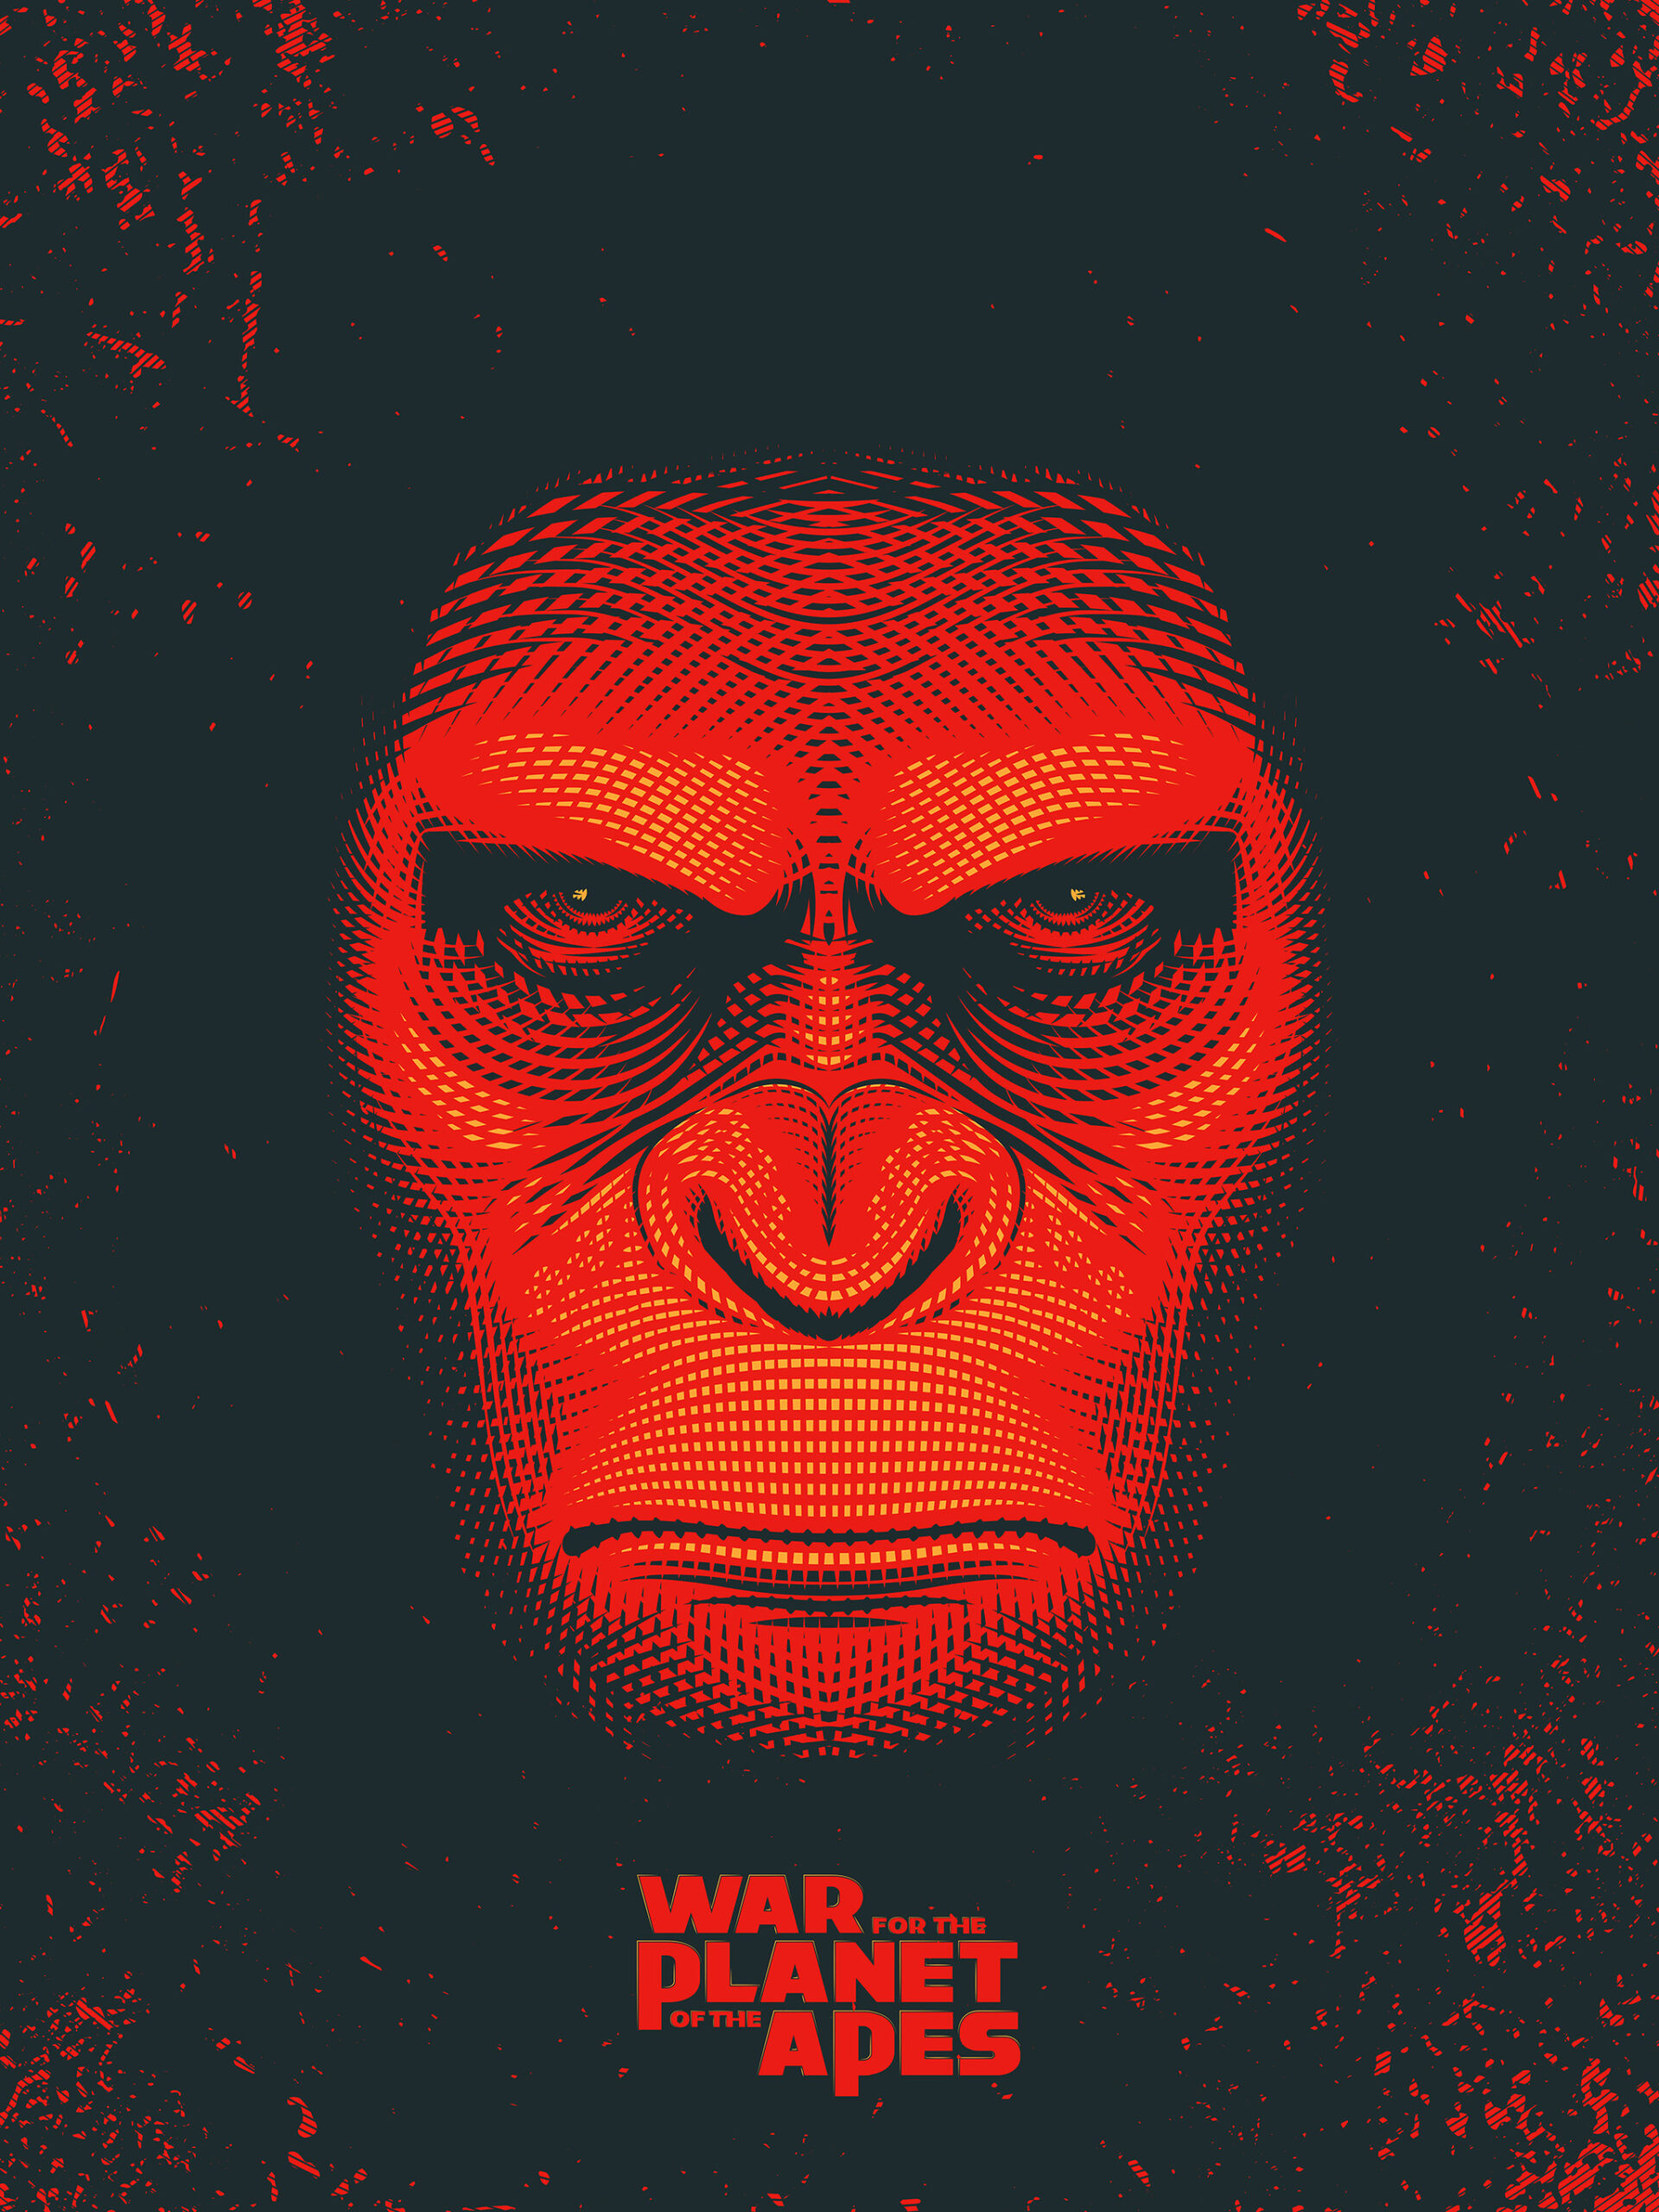 Planet of the Apes Illustration - Full